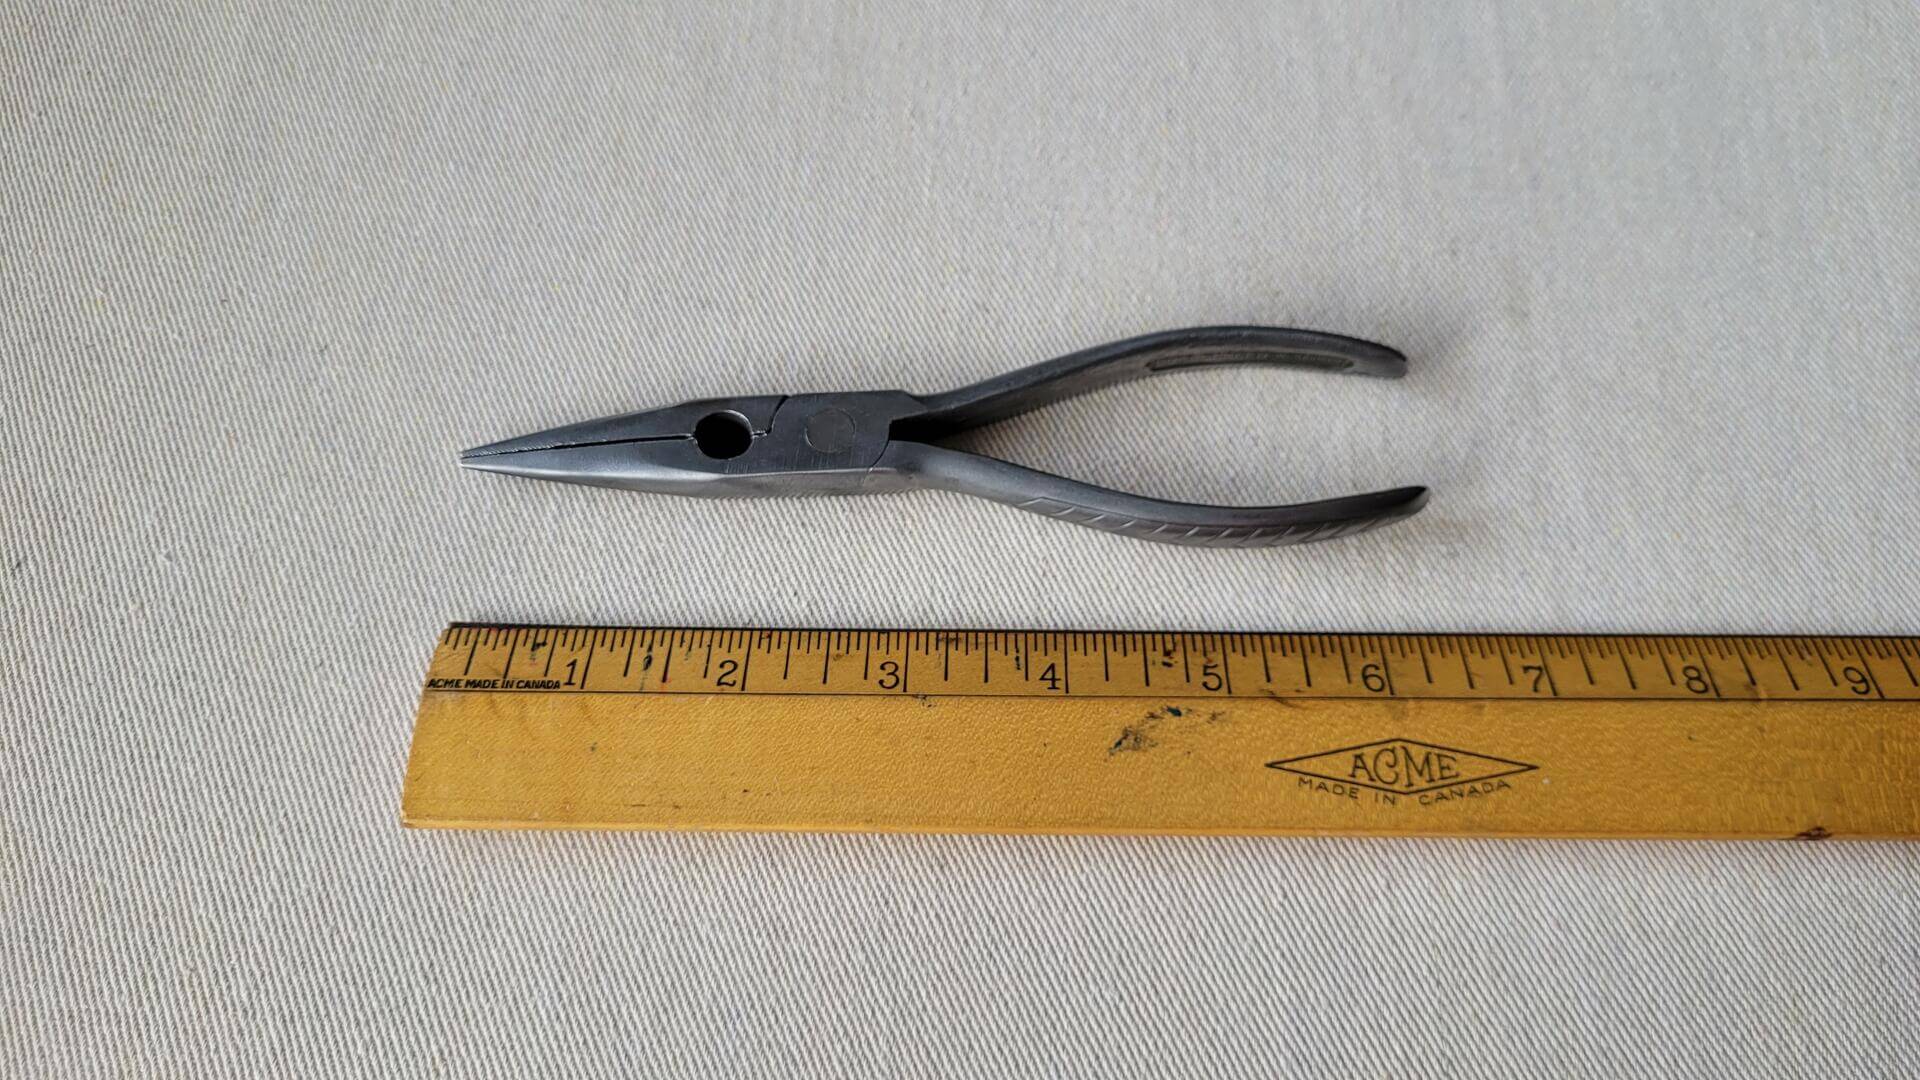 hoppe-needle-nose-drop-forged-pliers-antique-vintage-made-in-west6ern-germany-collectible-artisan-jeweler-hand-tools-measurements